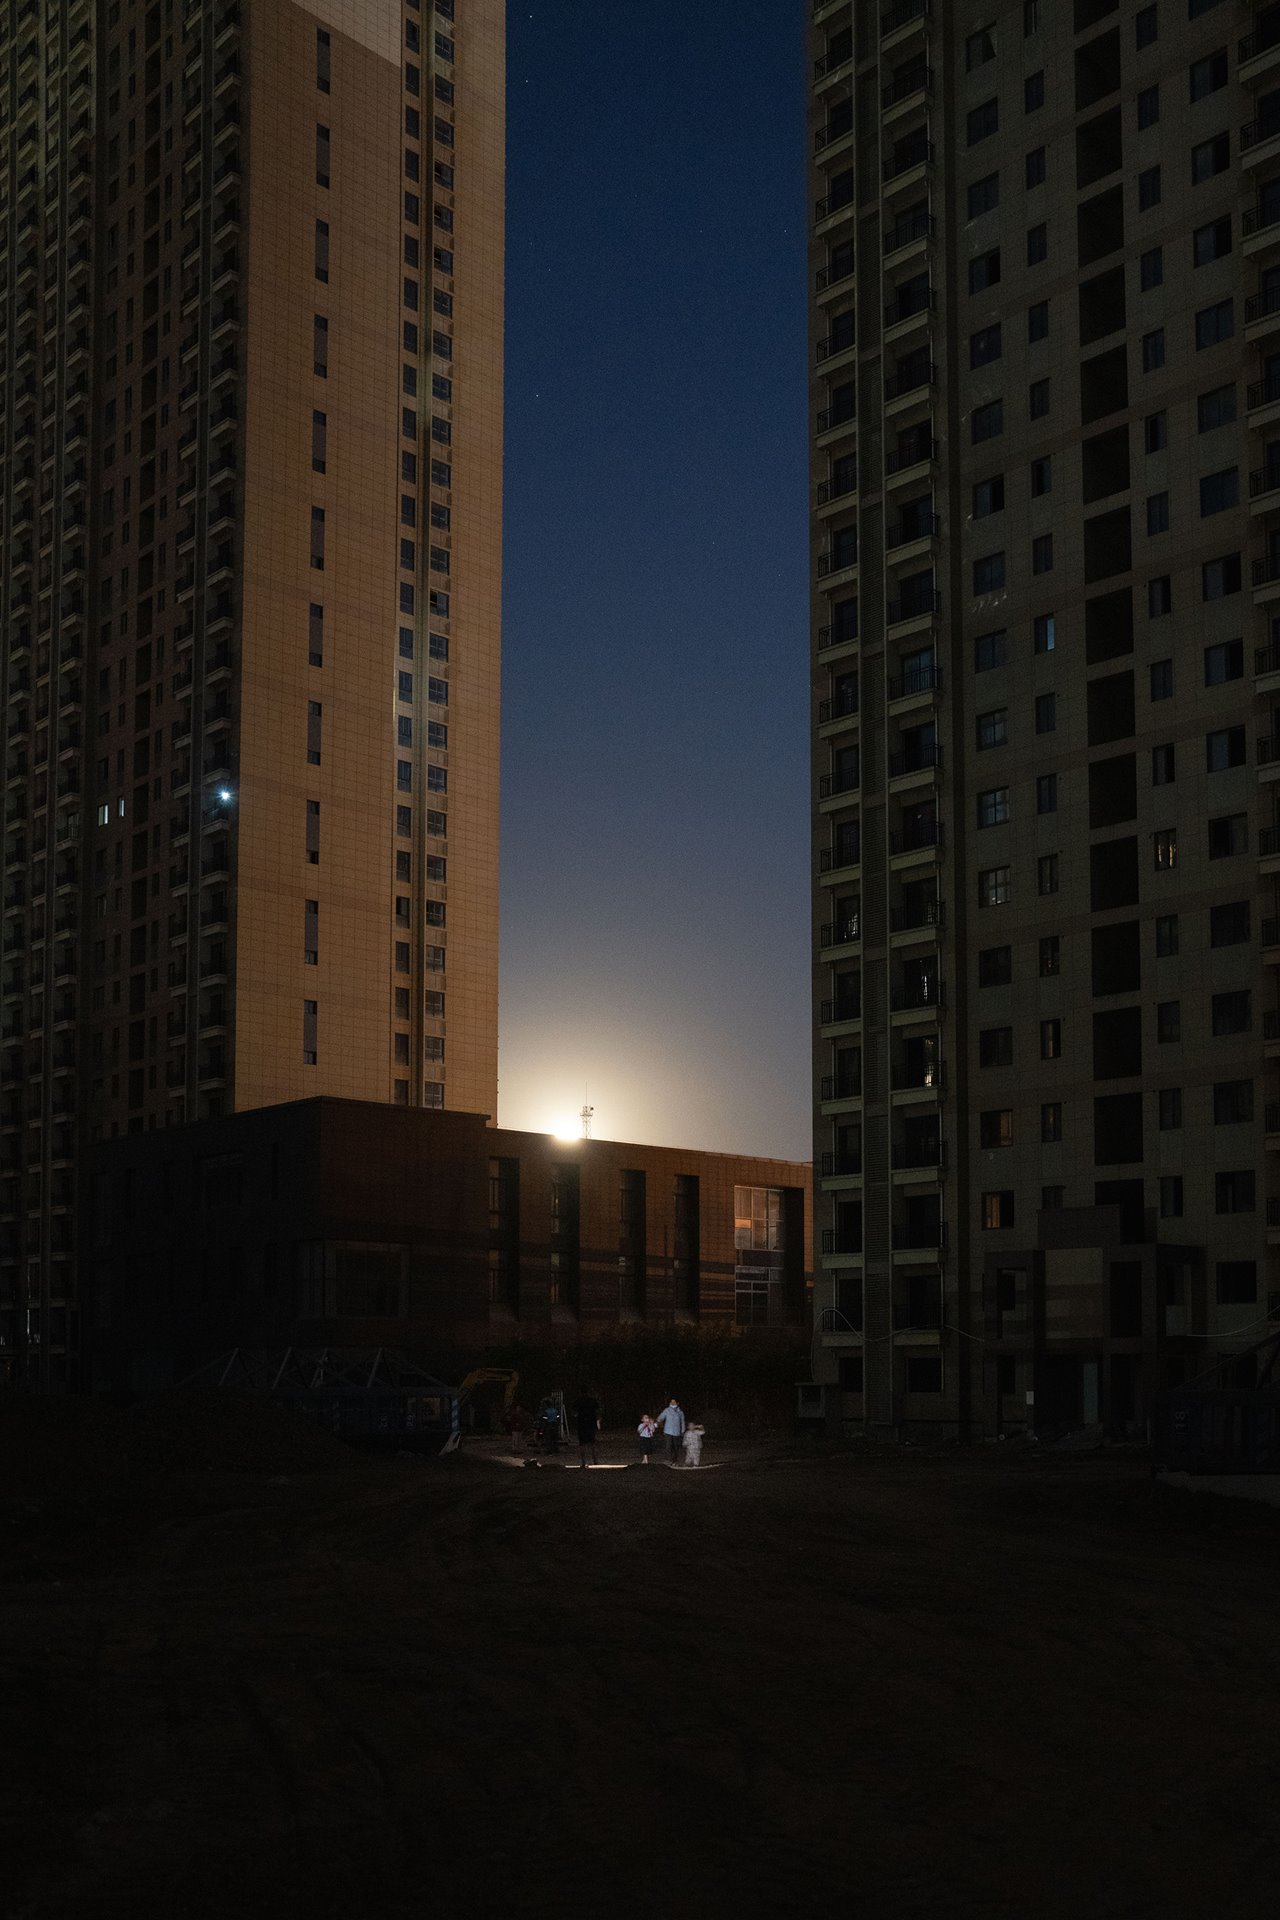 Two families greet each other by flashlight at moonrise in the Yihefang apartment complex in Xi&rsquo;an, China. Without electricity, residents make do with flashlights, solar powered lights, and an elevated sense of unity and community spirit.